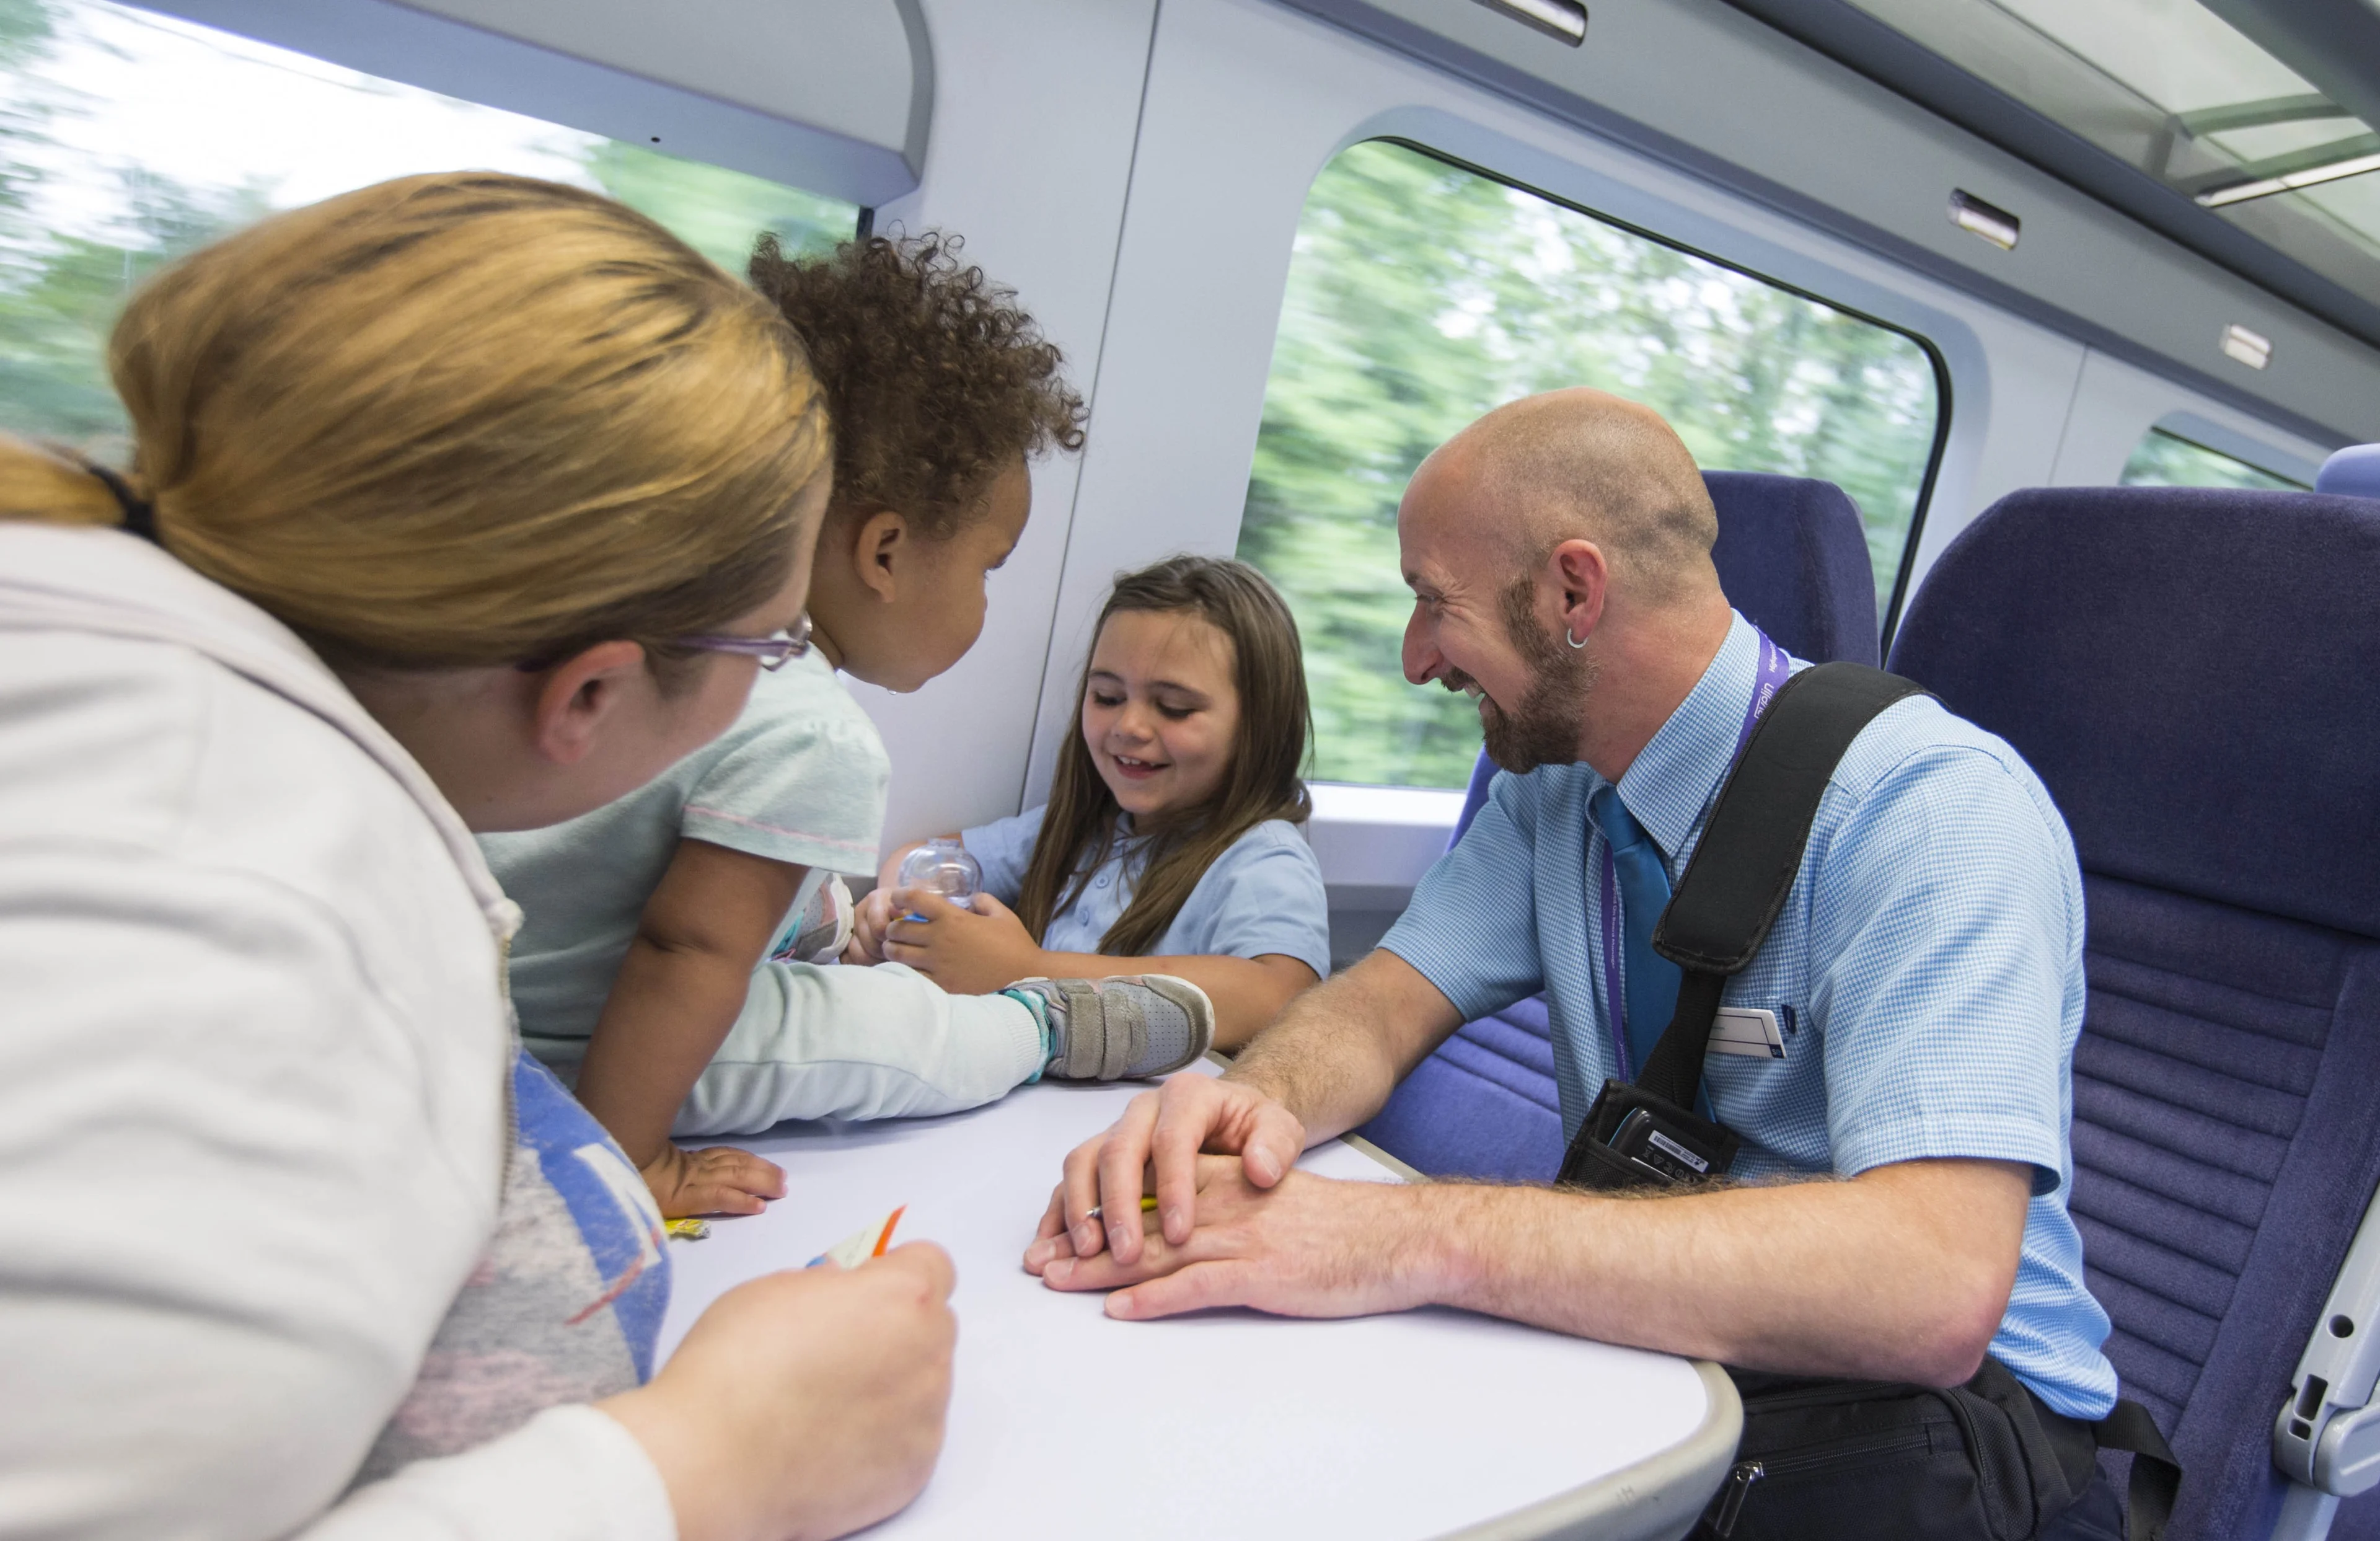 A woman and two children sit laughing at a table on a train with the onboard train guard, a man with a shaved head and beard.